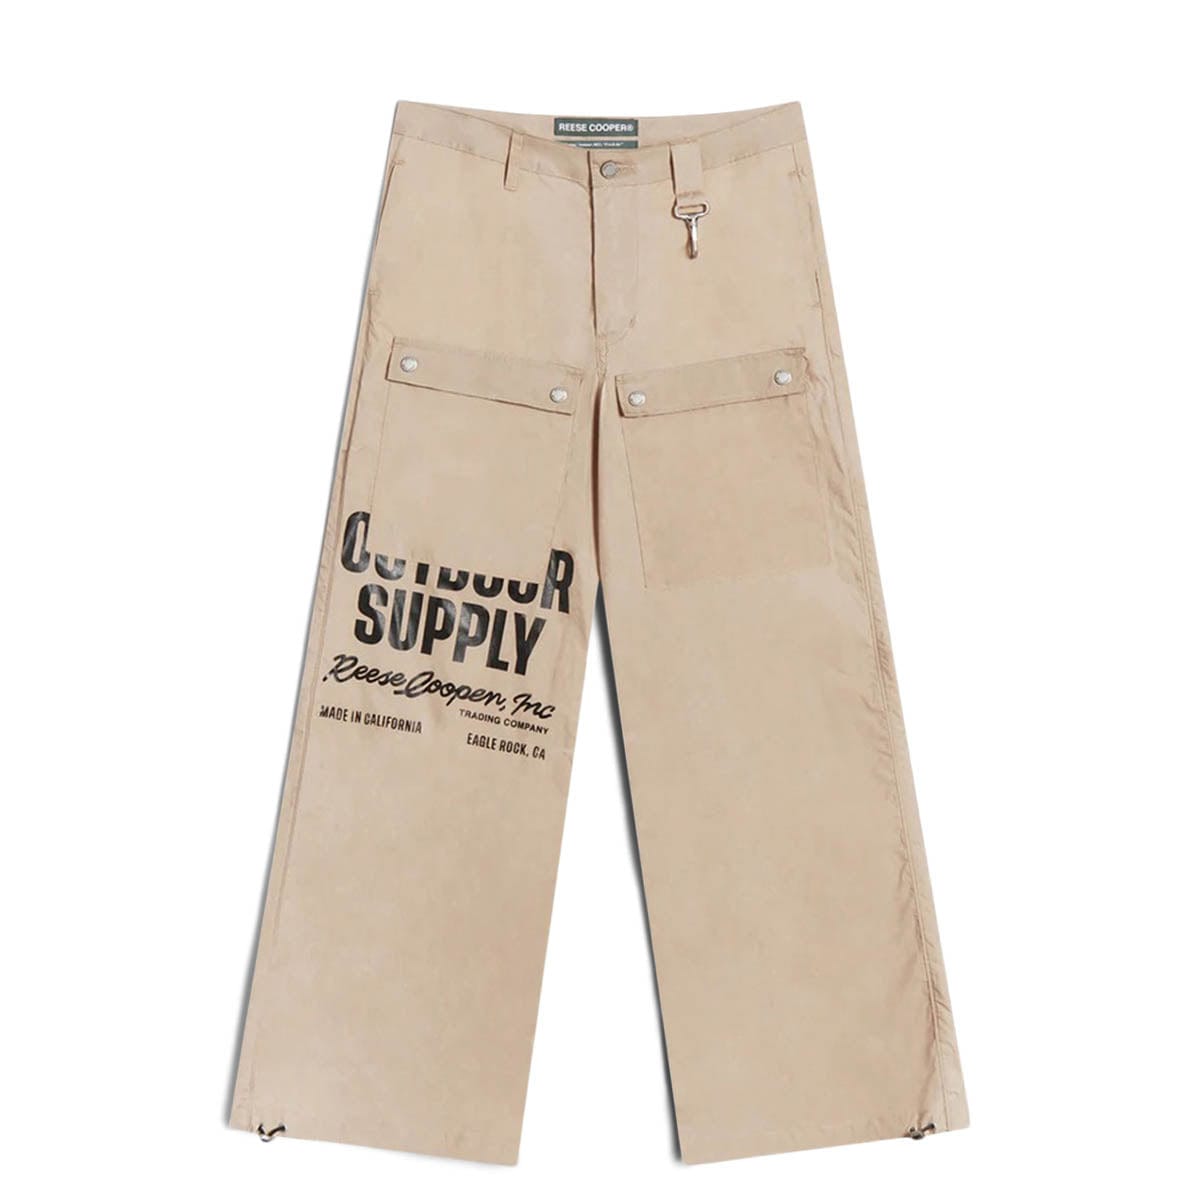 Reese Cooper Bottoms OUTDOOR SUPPLY WAXED COTTON PANT